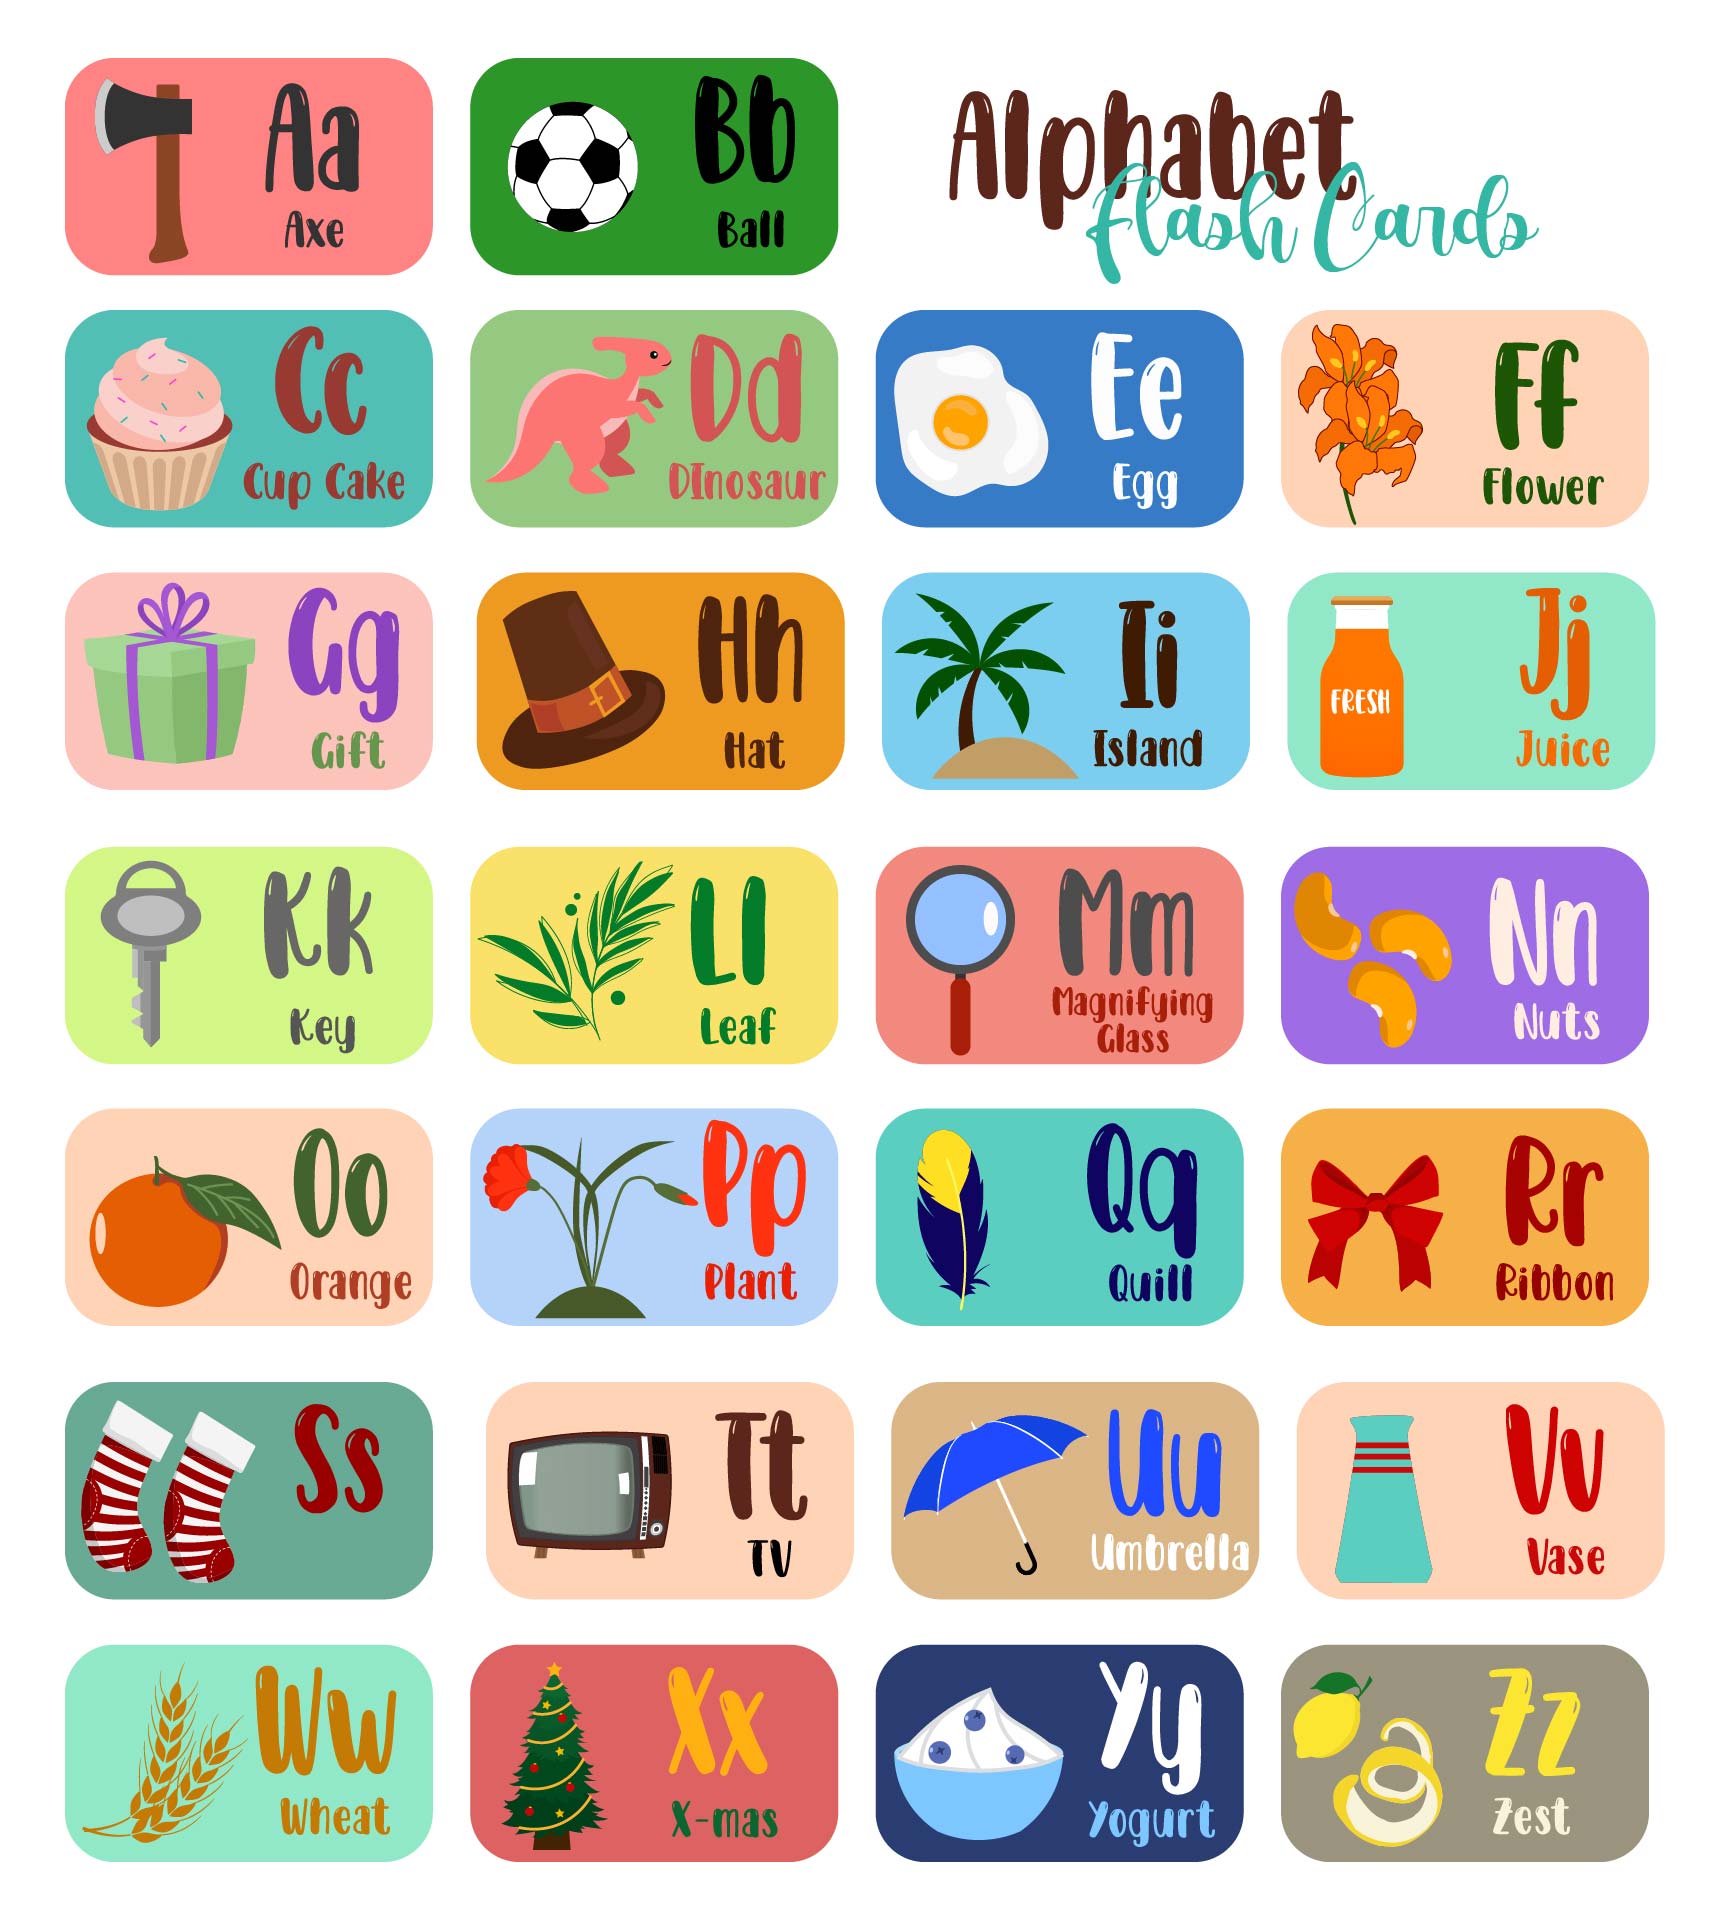 Free Printable Alphabet Flash Cards Upper And Lower Case